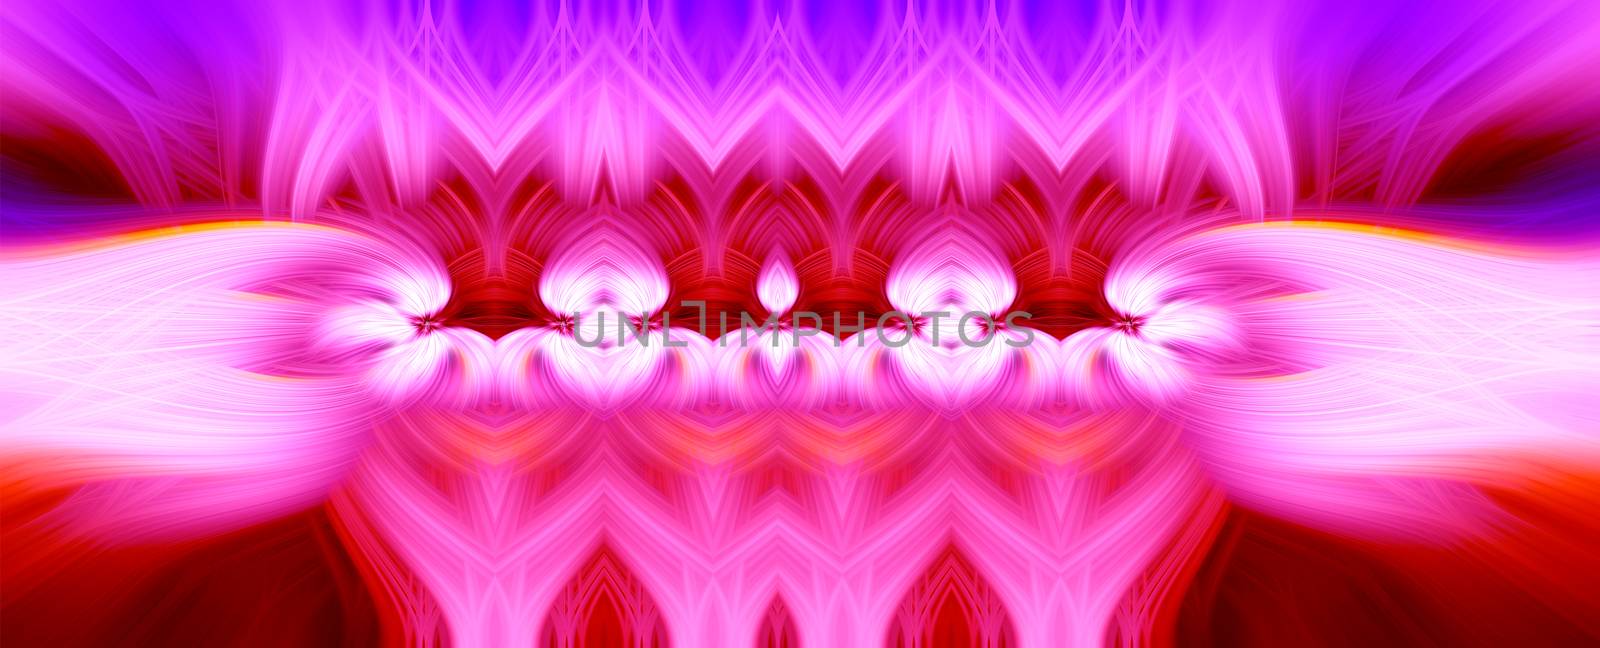 Beautiful abstract intertwined 3d fibers forming a shape of sparkle, flame, flower, interlinked hearts. Pink, purple, maroon and red colors. Illustration. Banner and panorama size. Banner and panorama size.